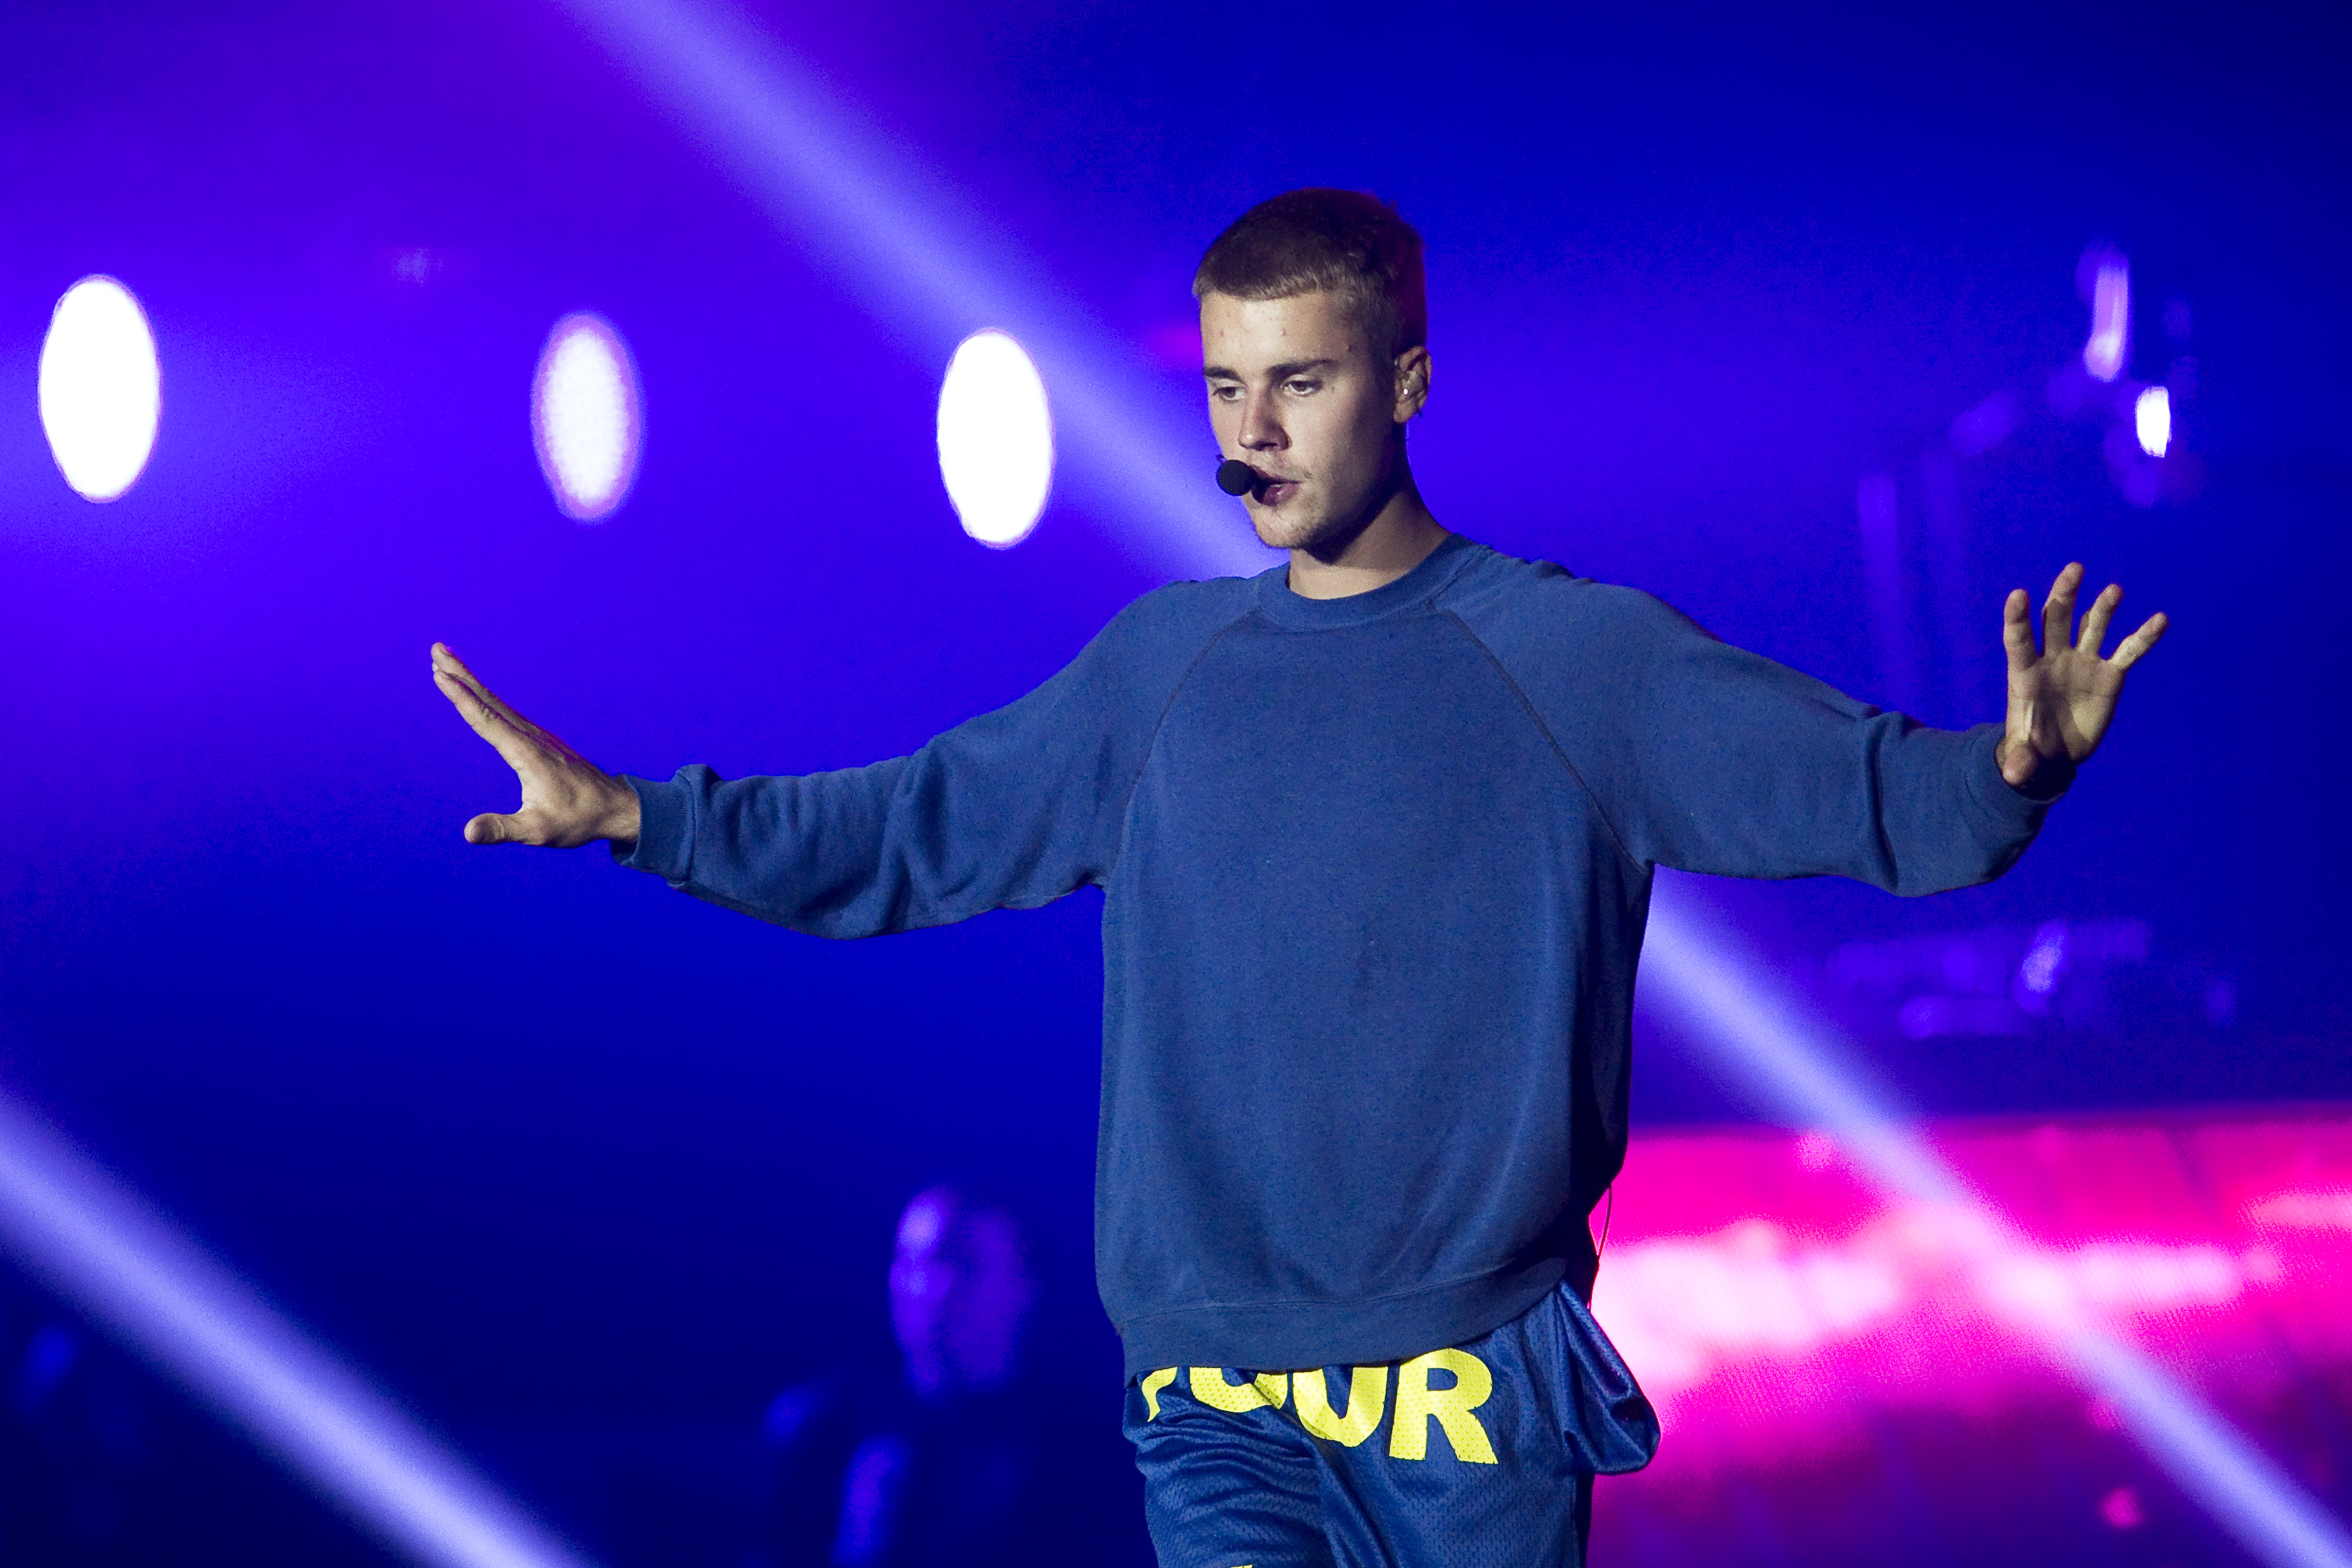 Justin Bieber Announces New Album to Come Out This Year - Hot Pop Today